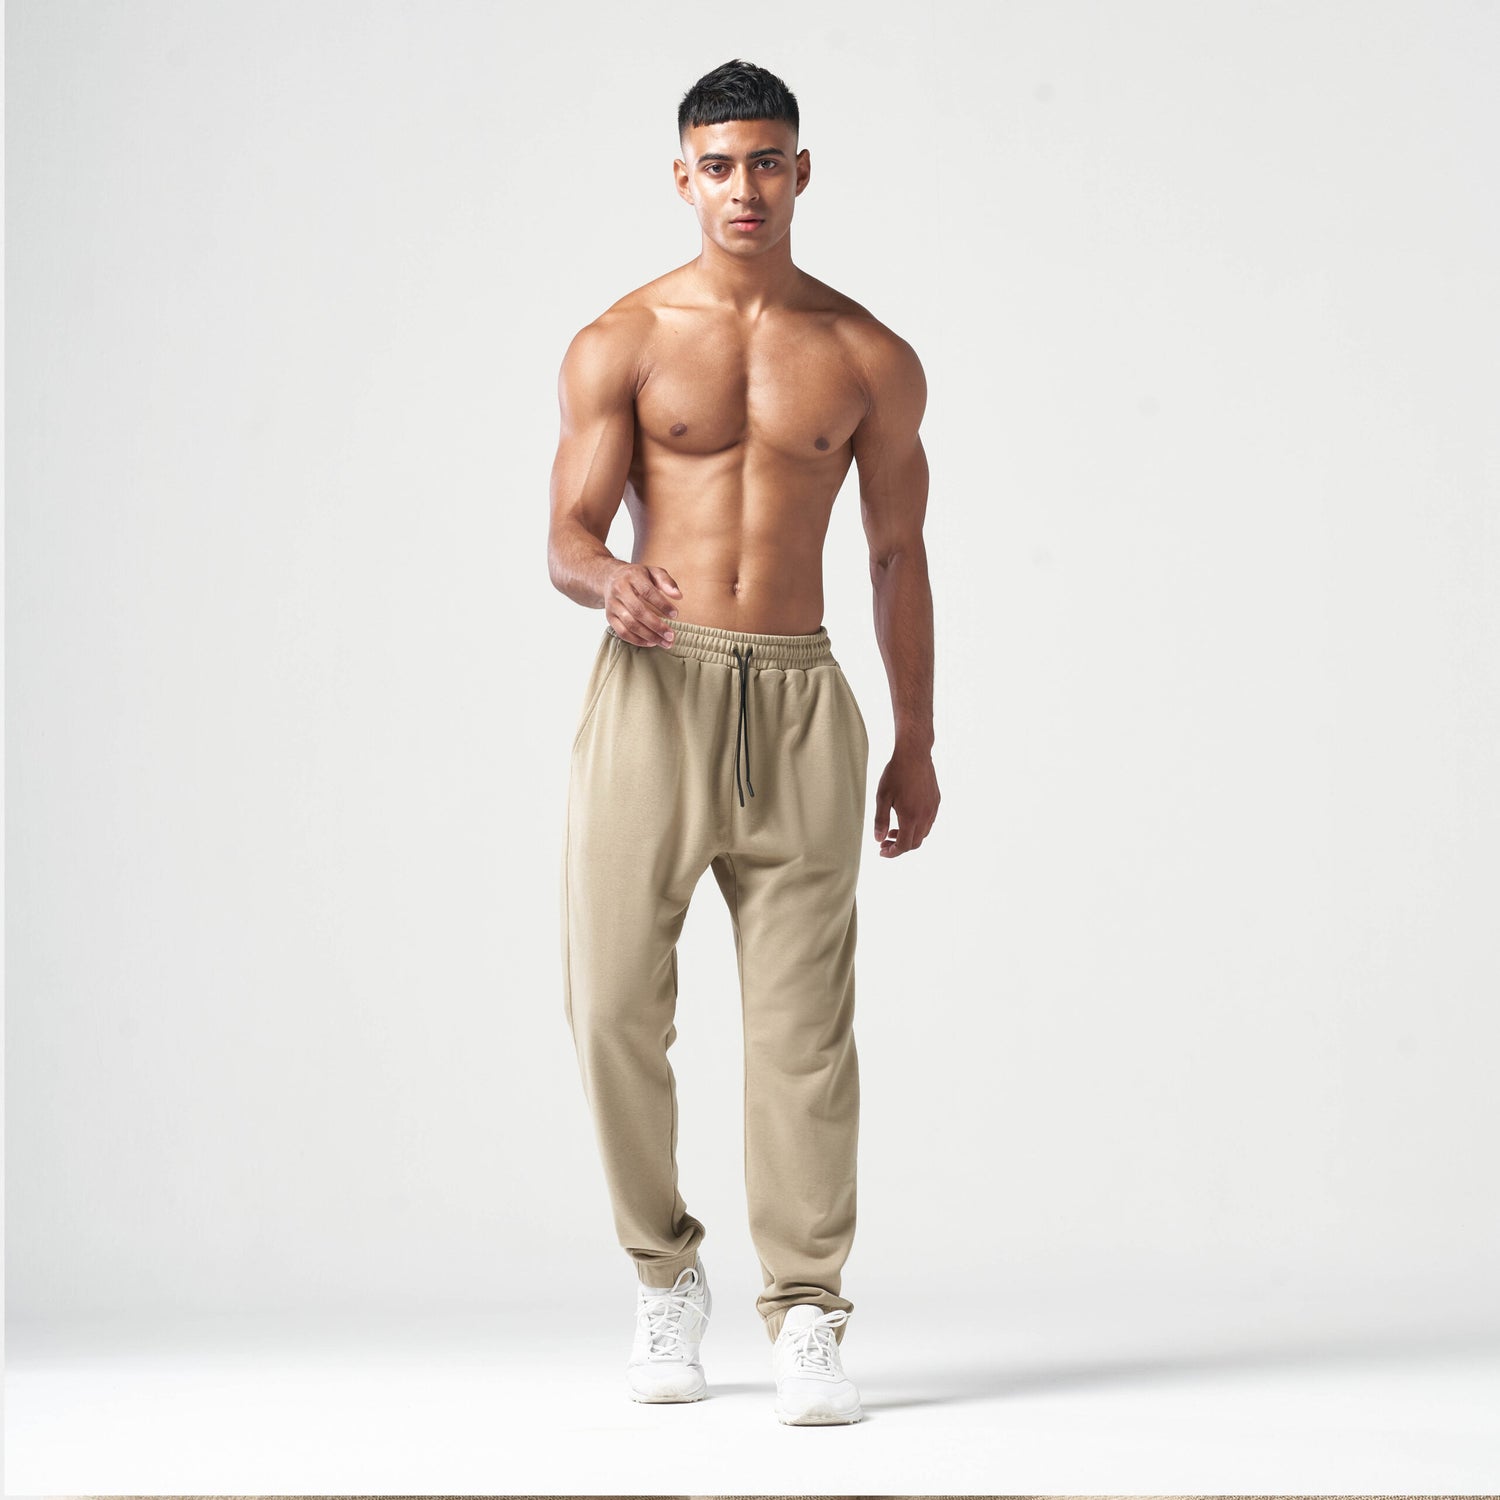 Beige Sweatpants with Hoodie Outfits For Men (15 ideas & outfits)